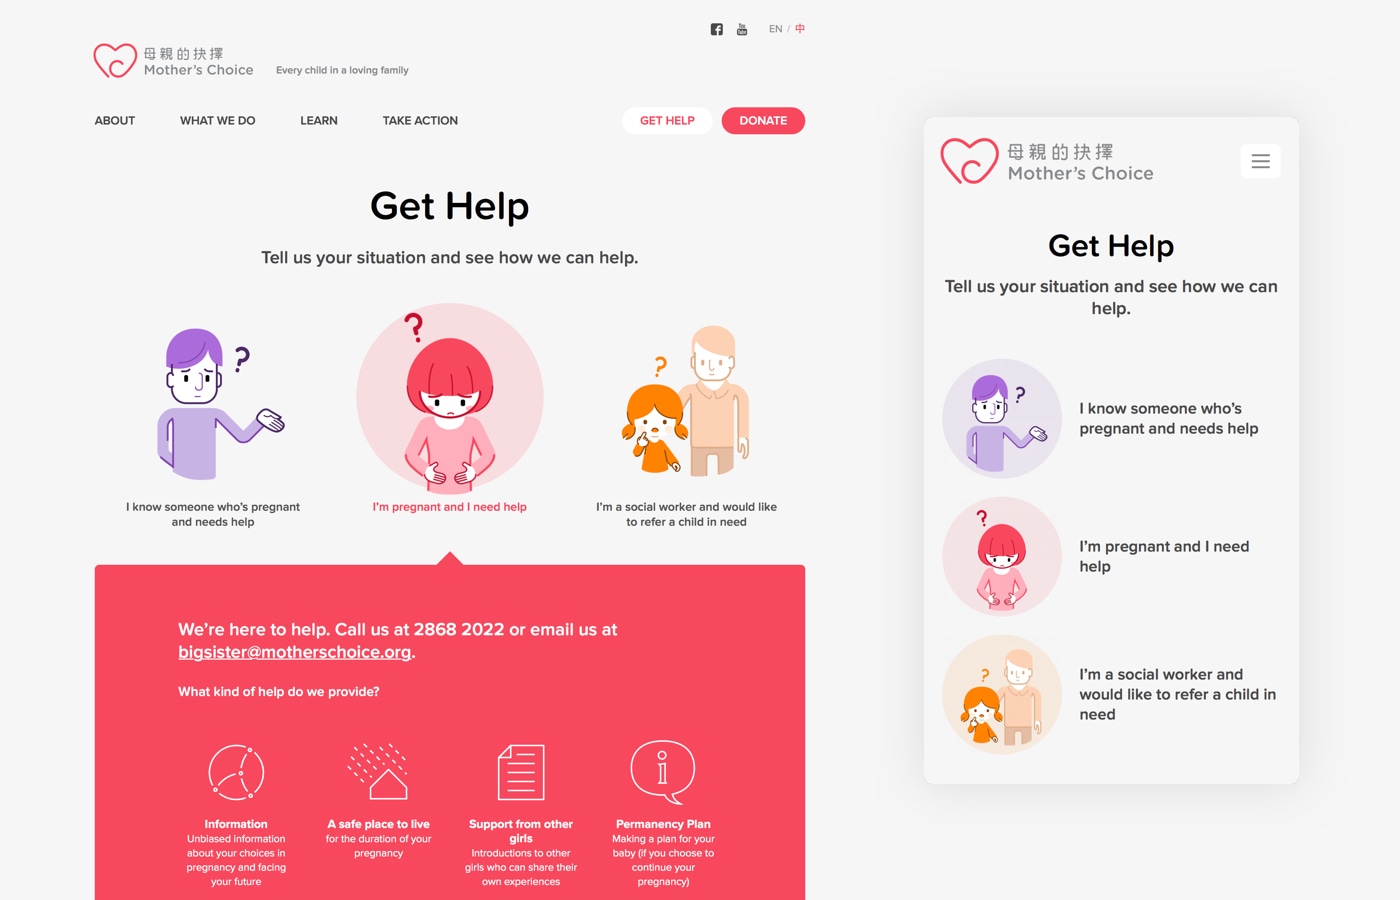 “Get Help” page